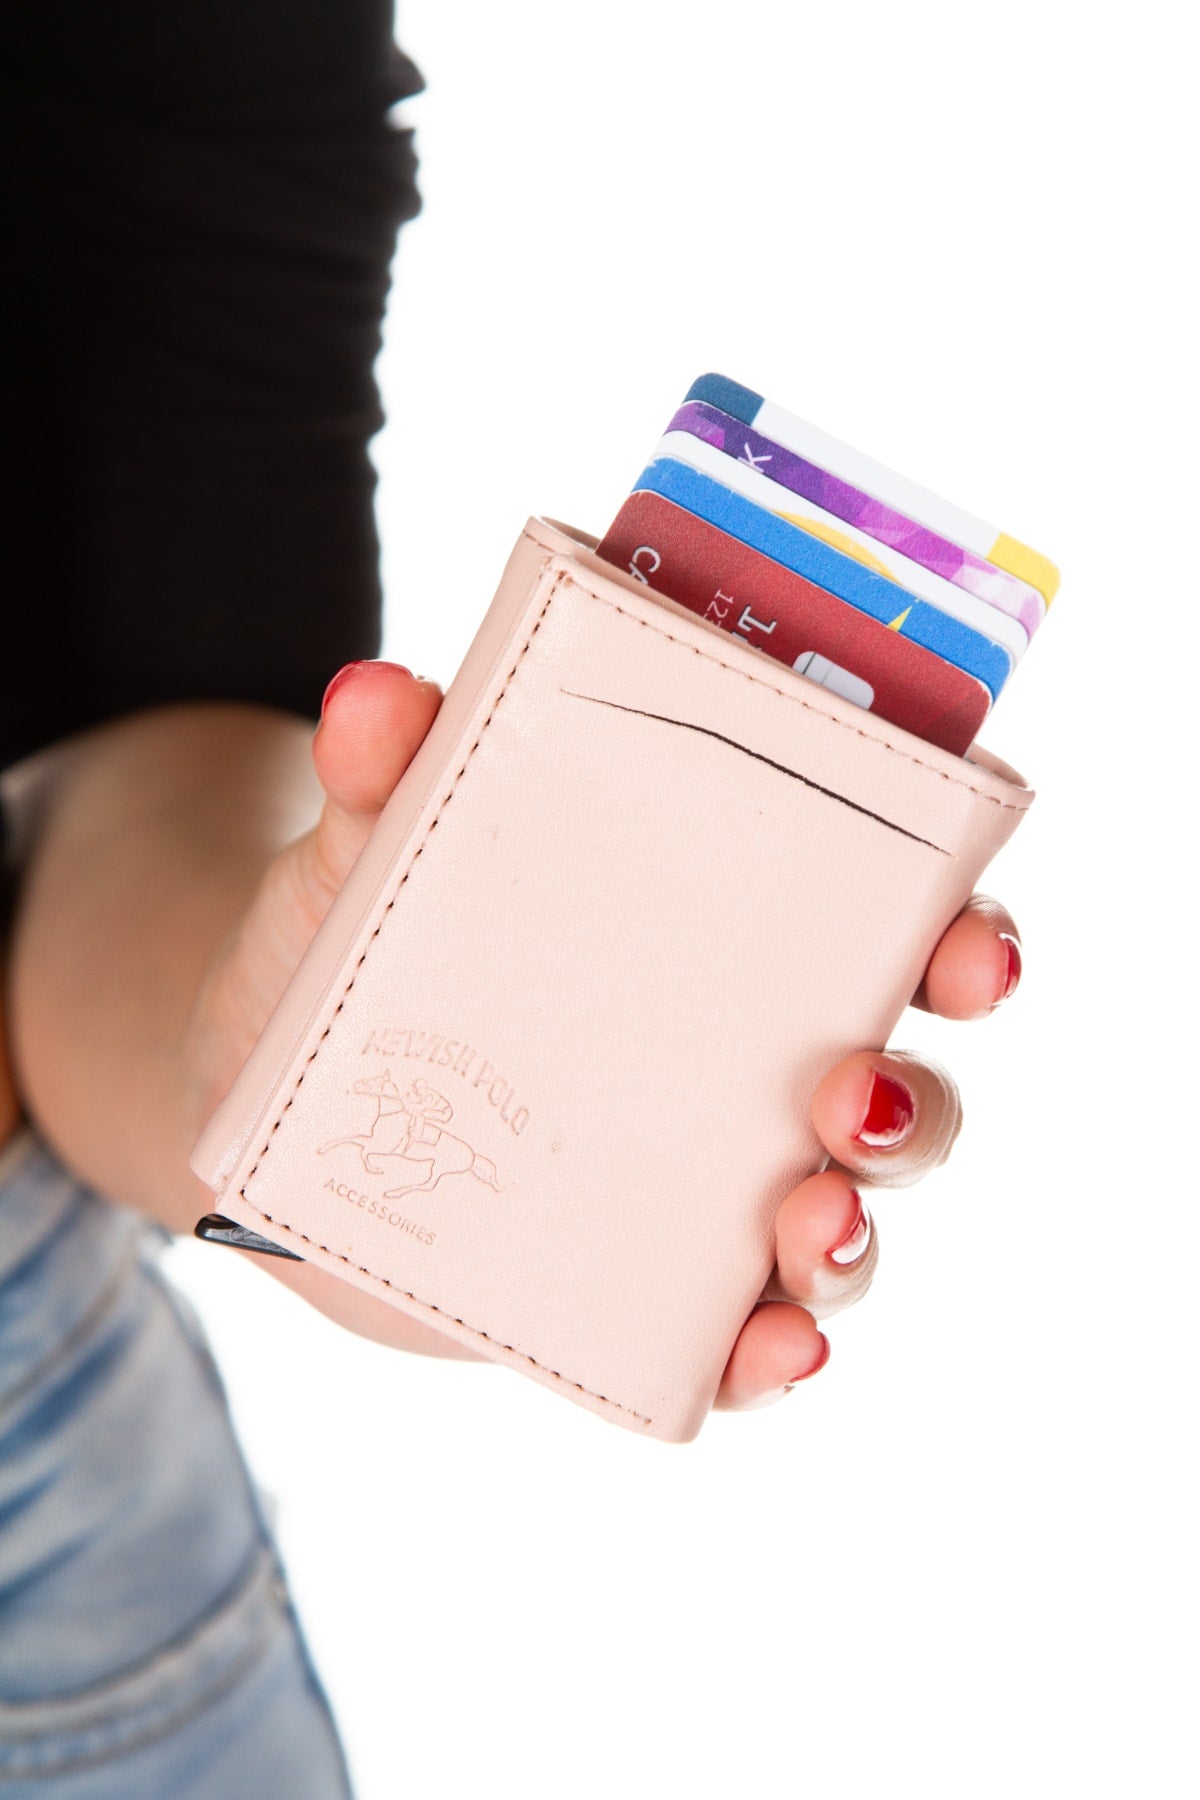 Unisex Leather Aluminum Mechanism Sliding Card Holder Wallet With Paper Money Compartment